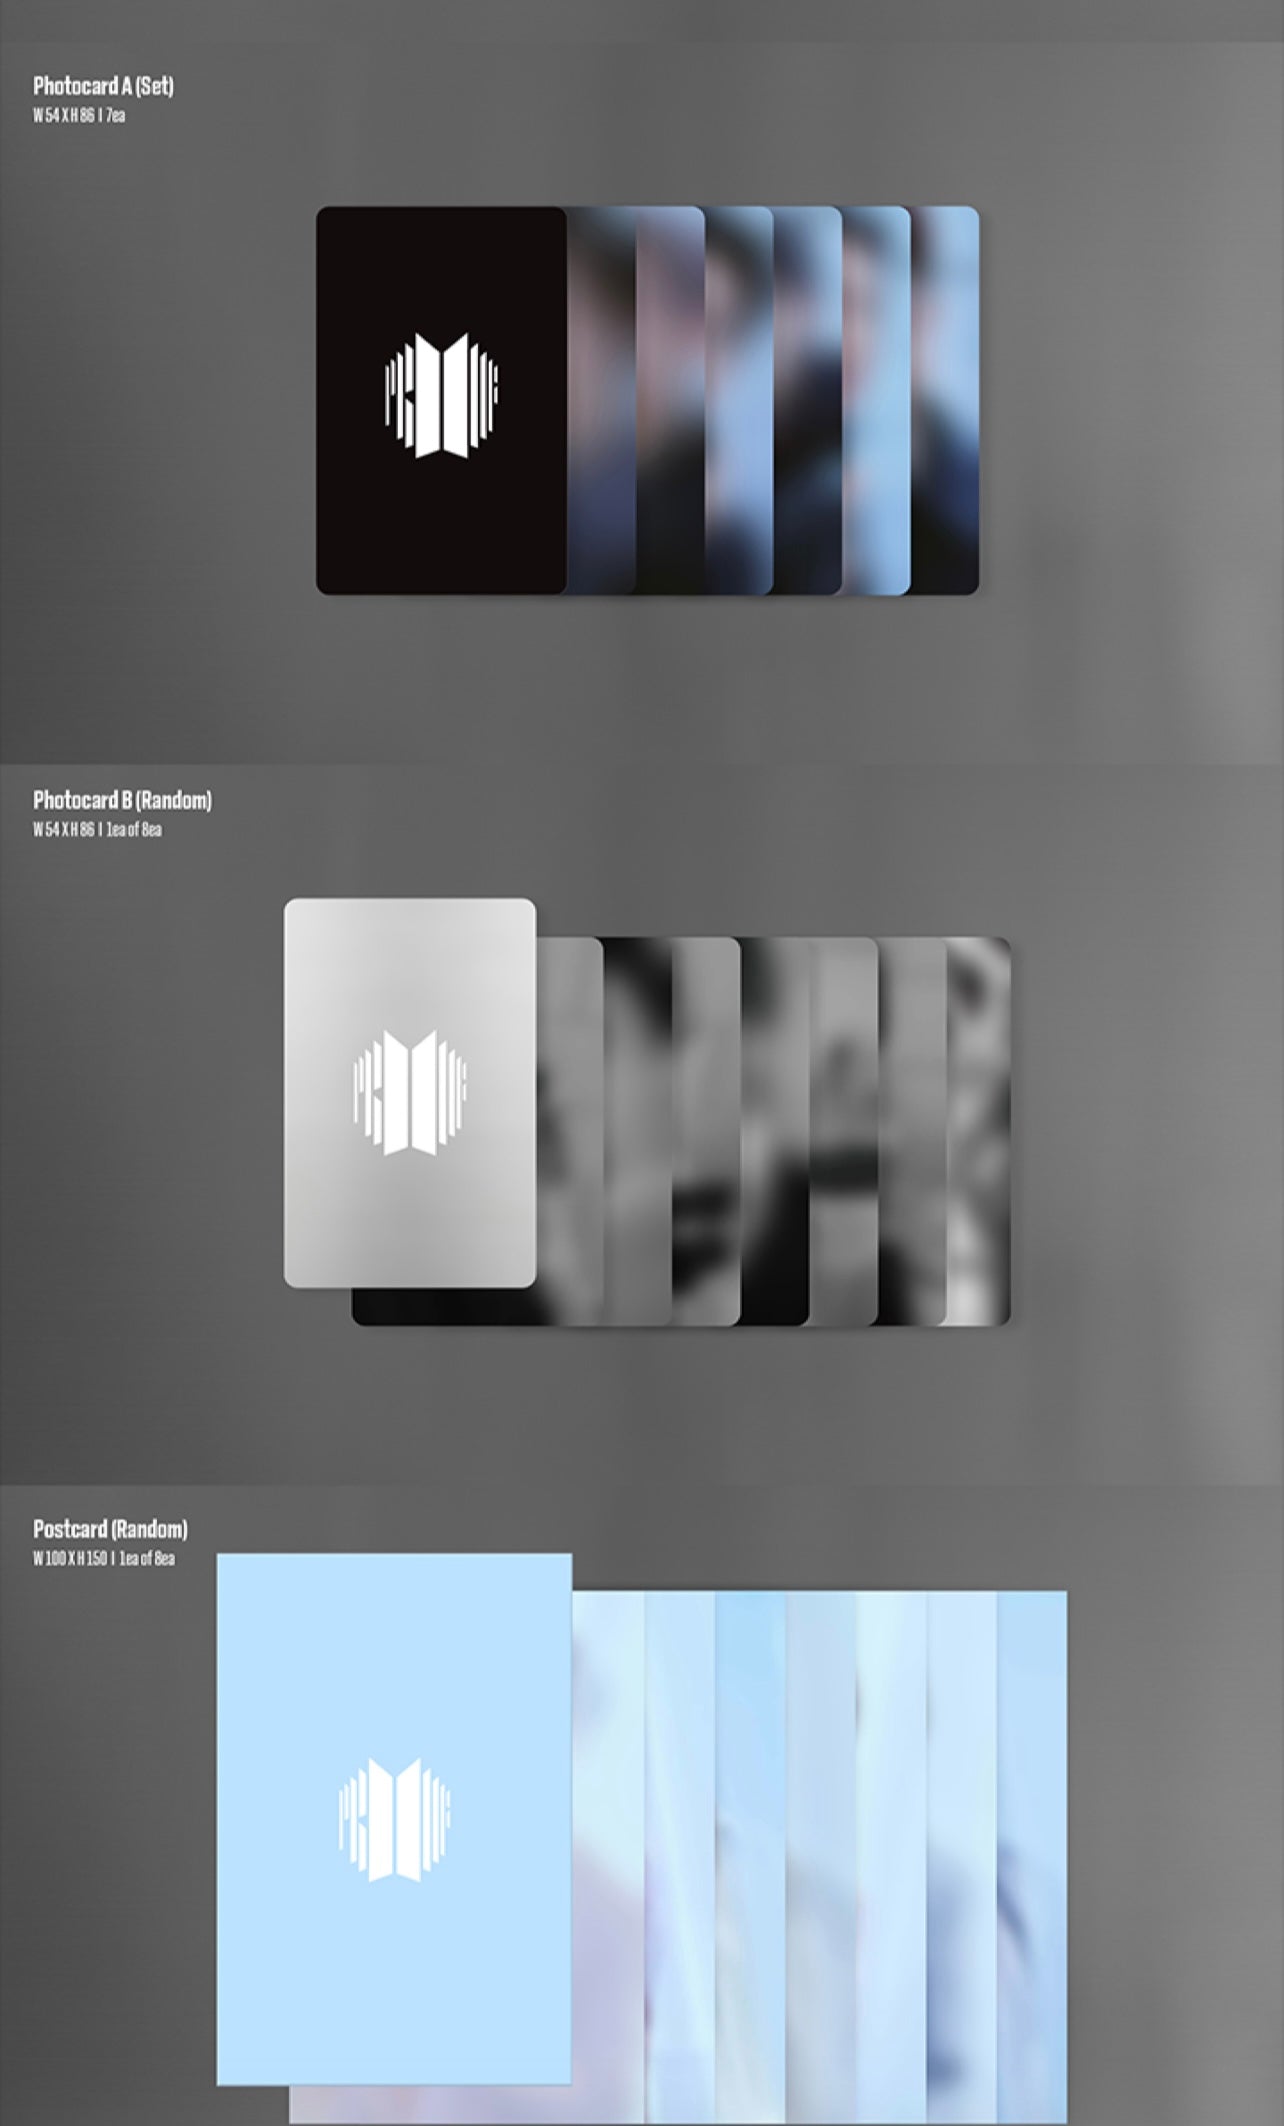 BTS Anthology Album - Proof (Standard Edition) WEVERSE Gift Included